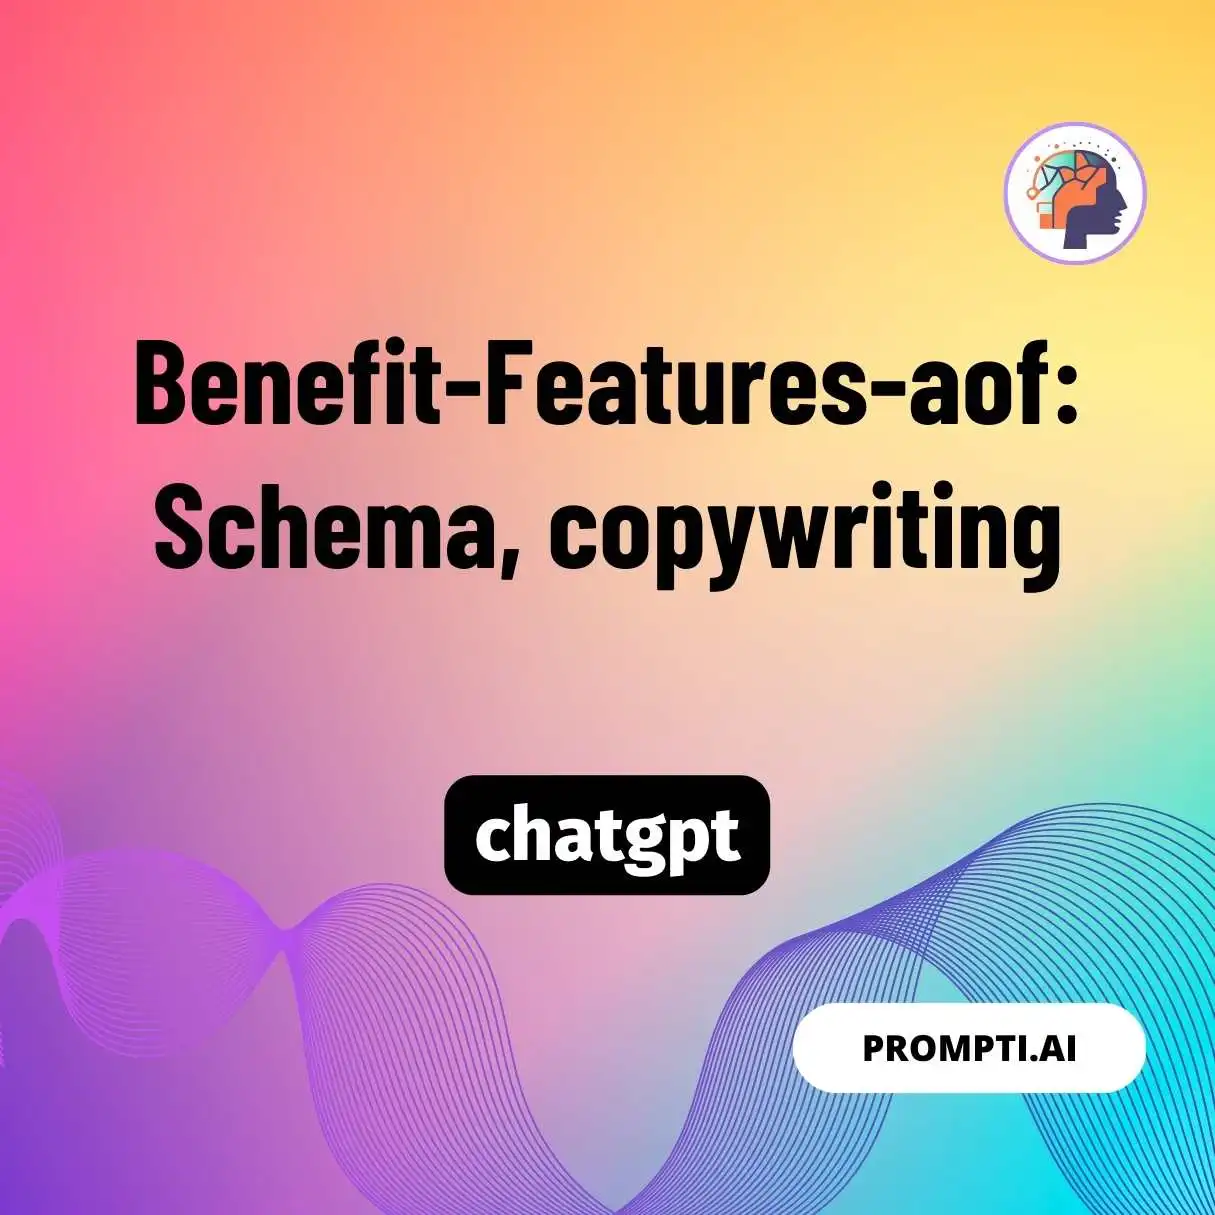 Benefit-Features-aof: Schema, copywriting